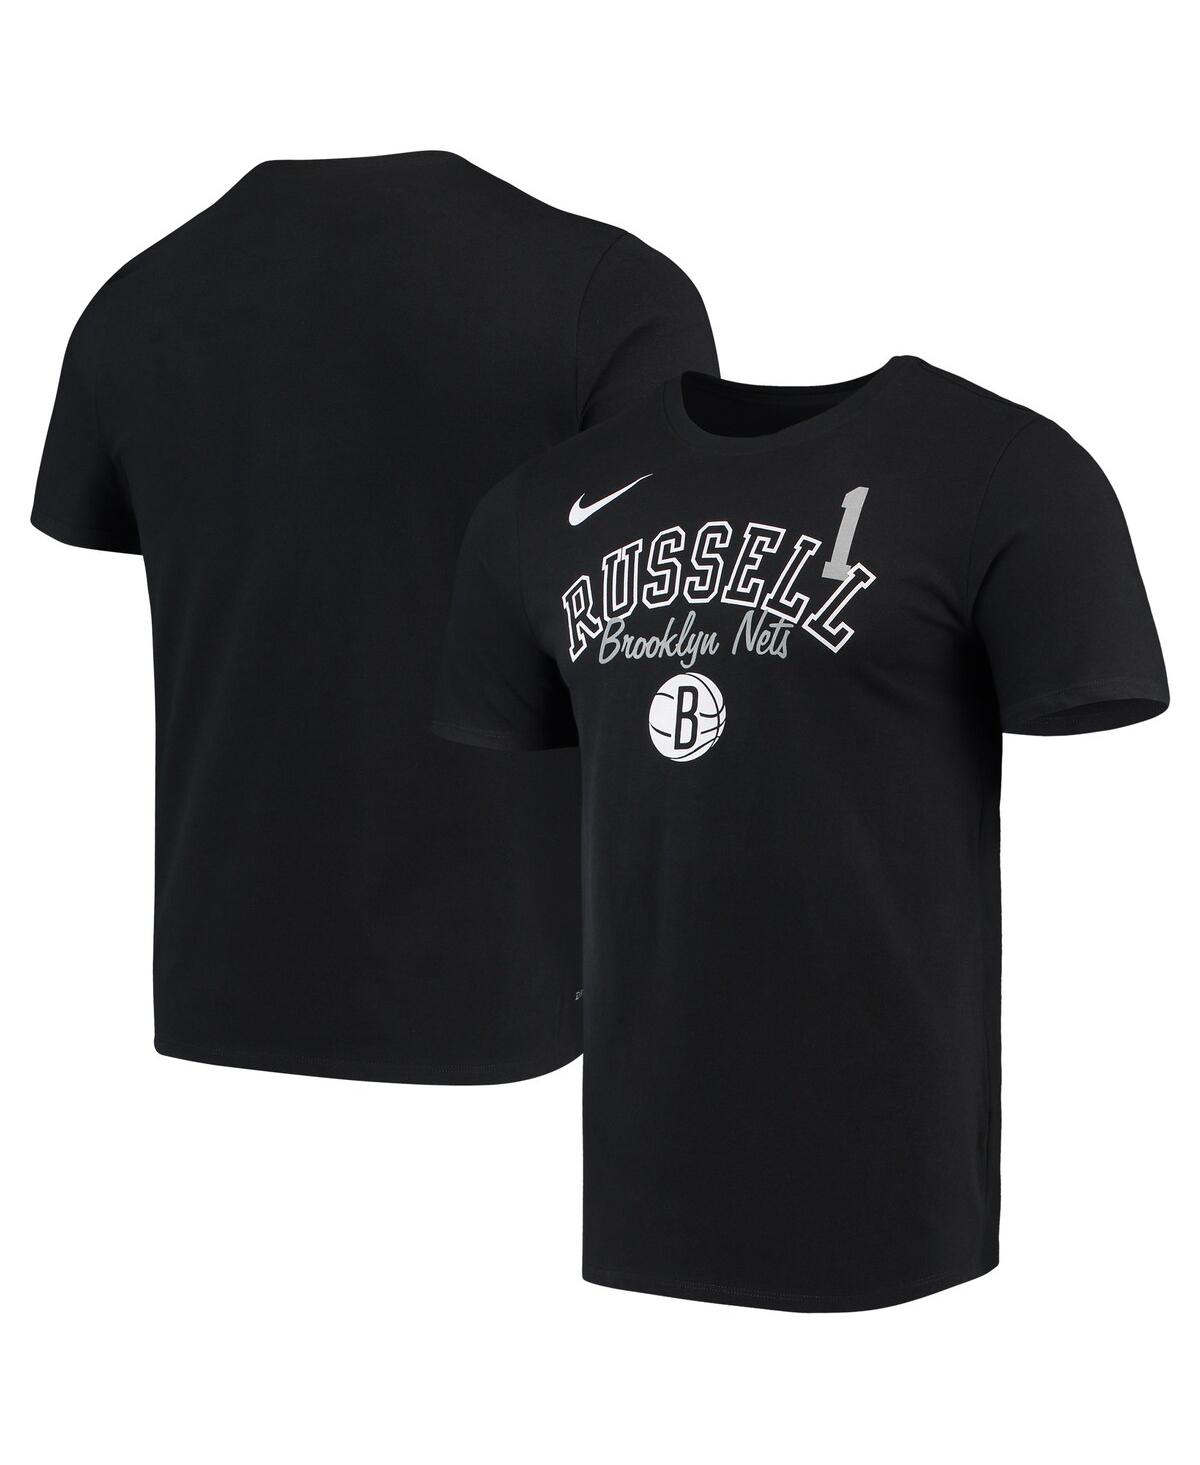 UPC 194305000053 product image for Men's Nike D'Angelo Russell Black Brooklyn Nets Player Performance T-shirt | upcitemdb.com